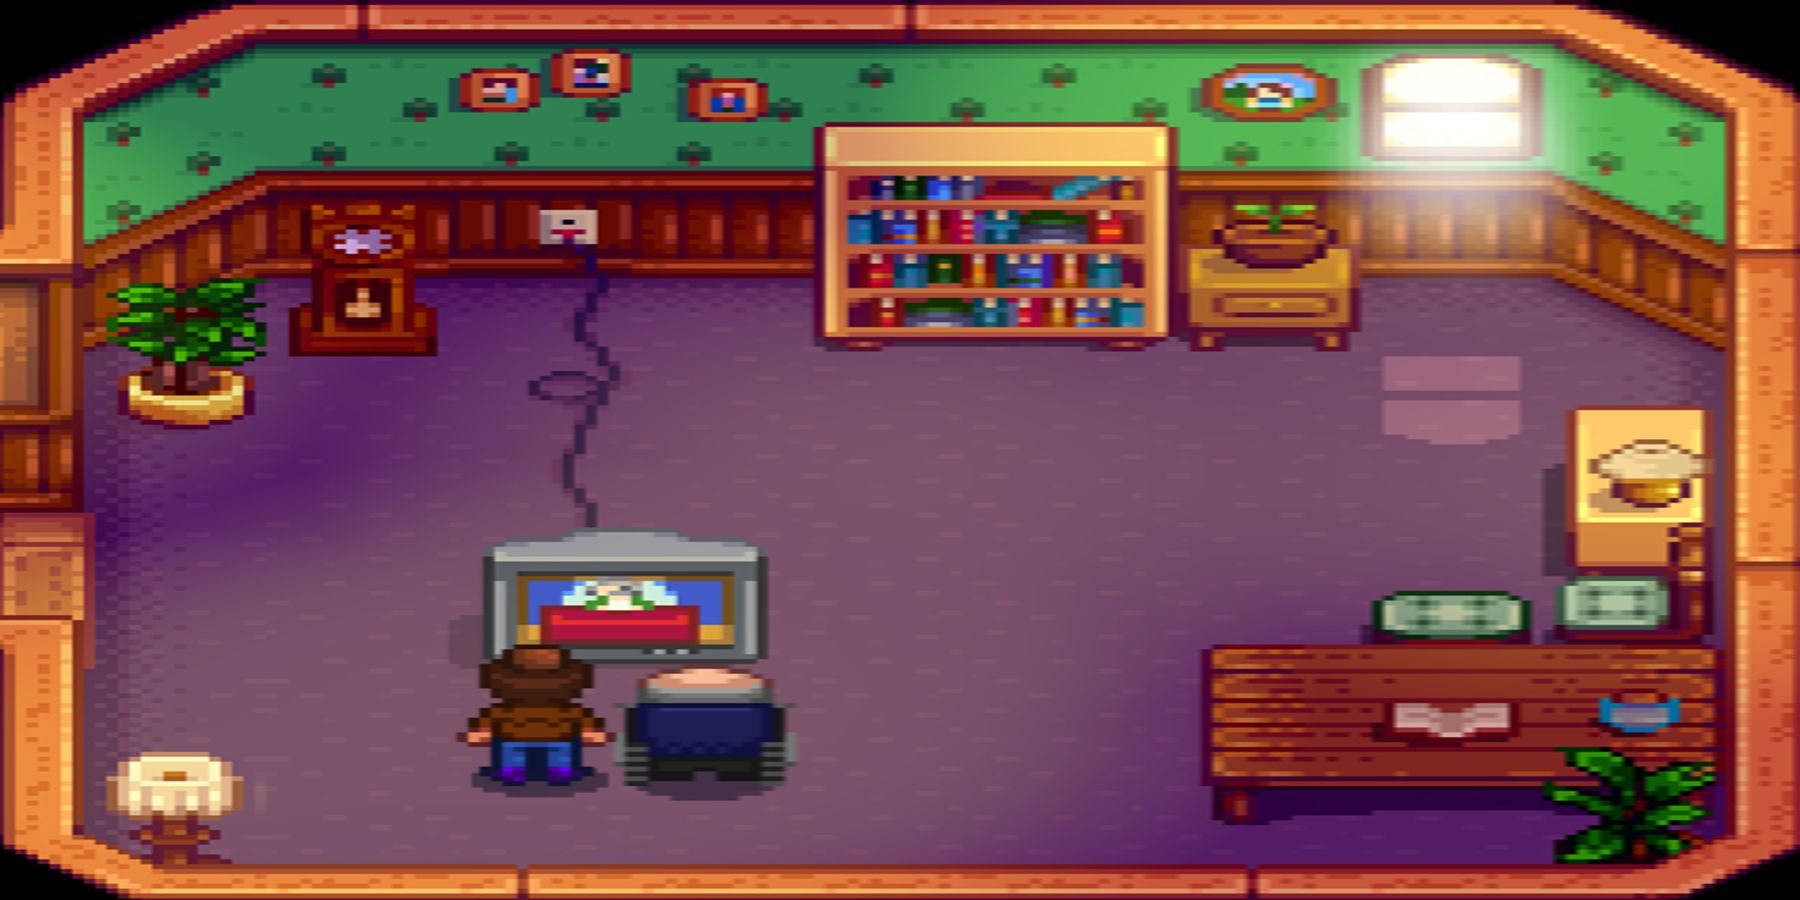 Stardew Valley player watches TV with George